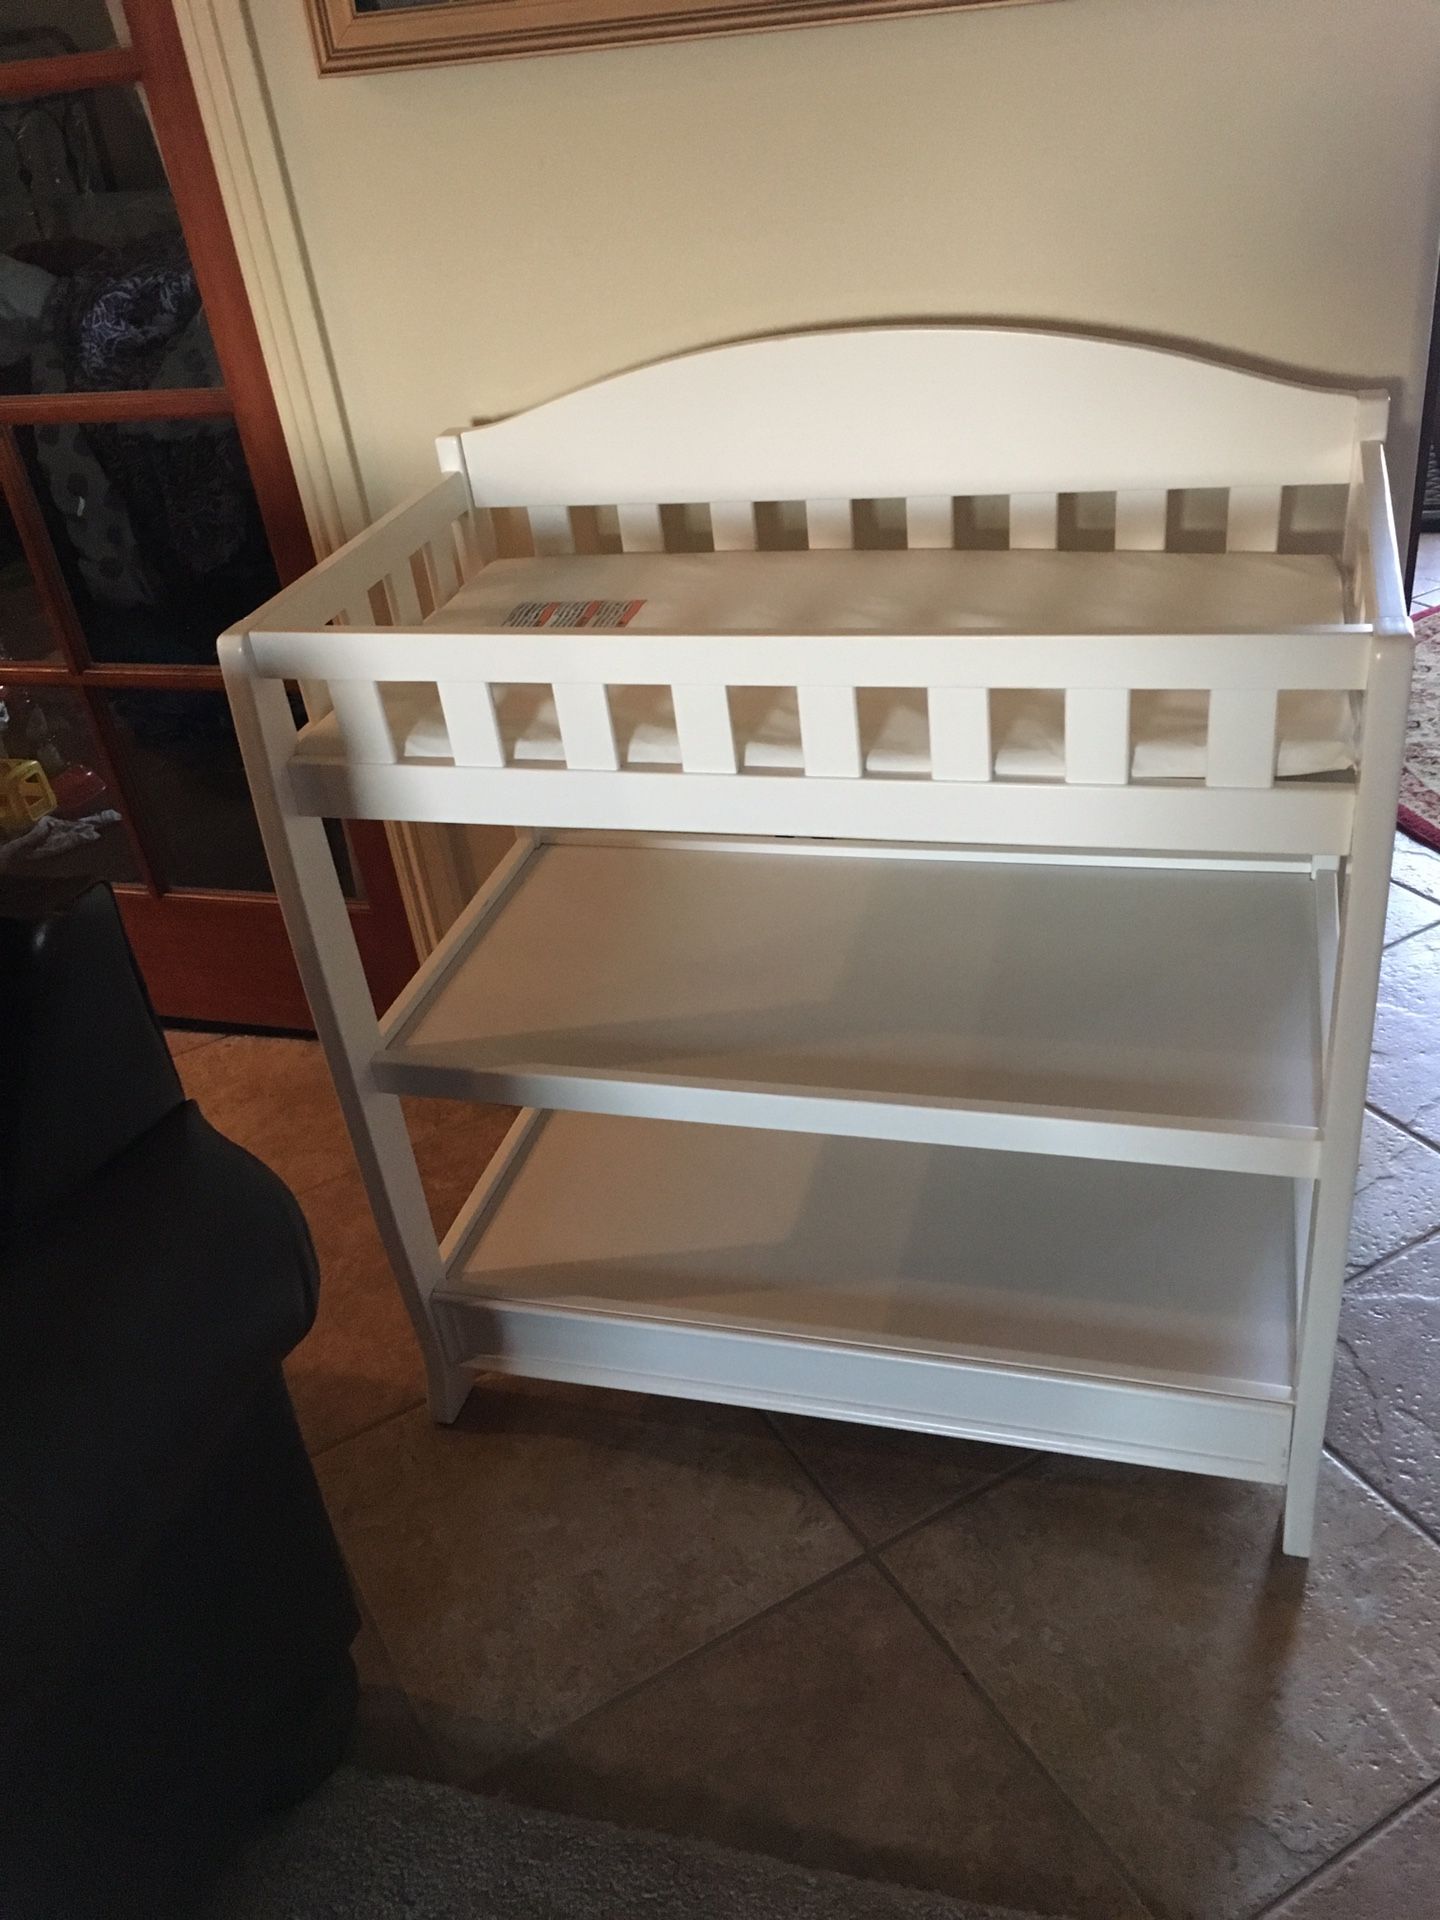 Brand new changing table with pad